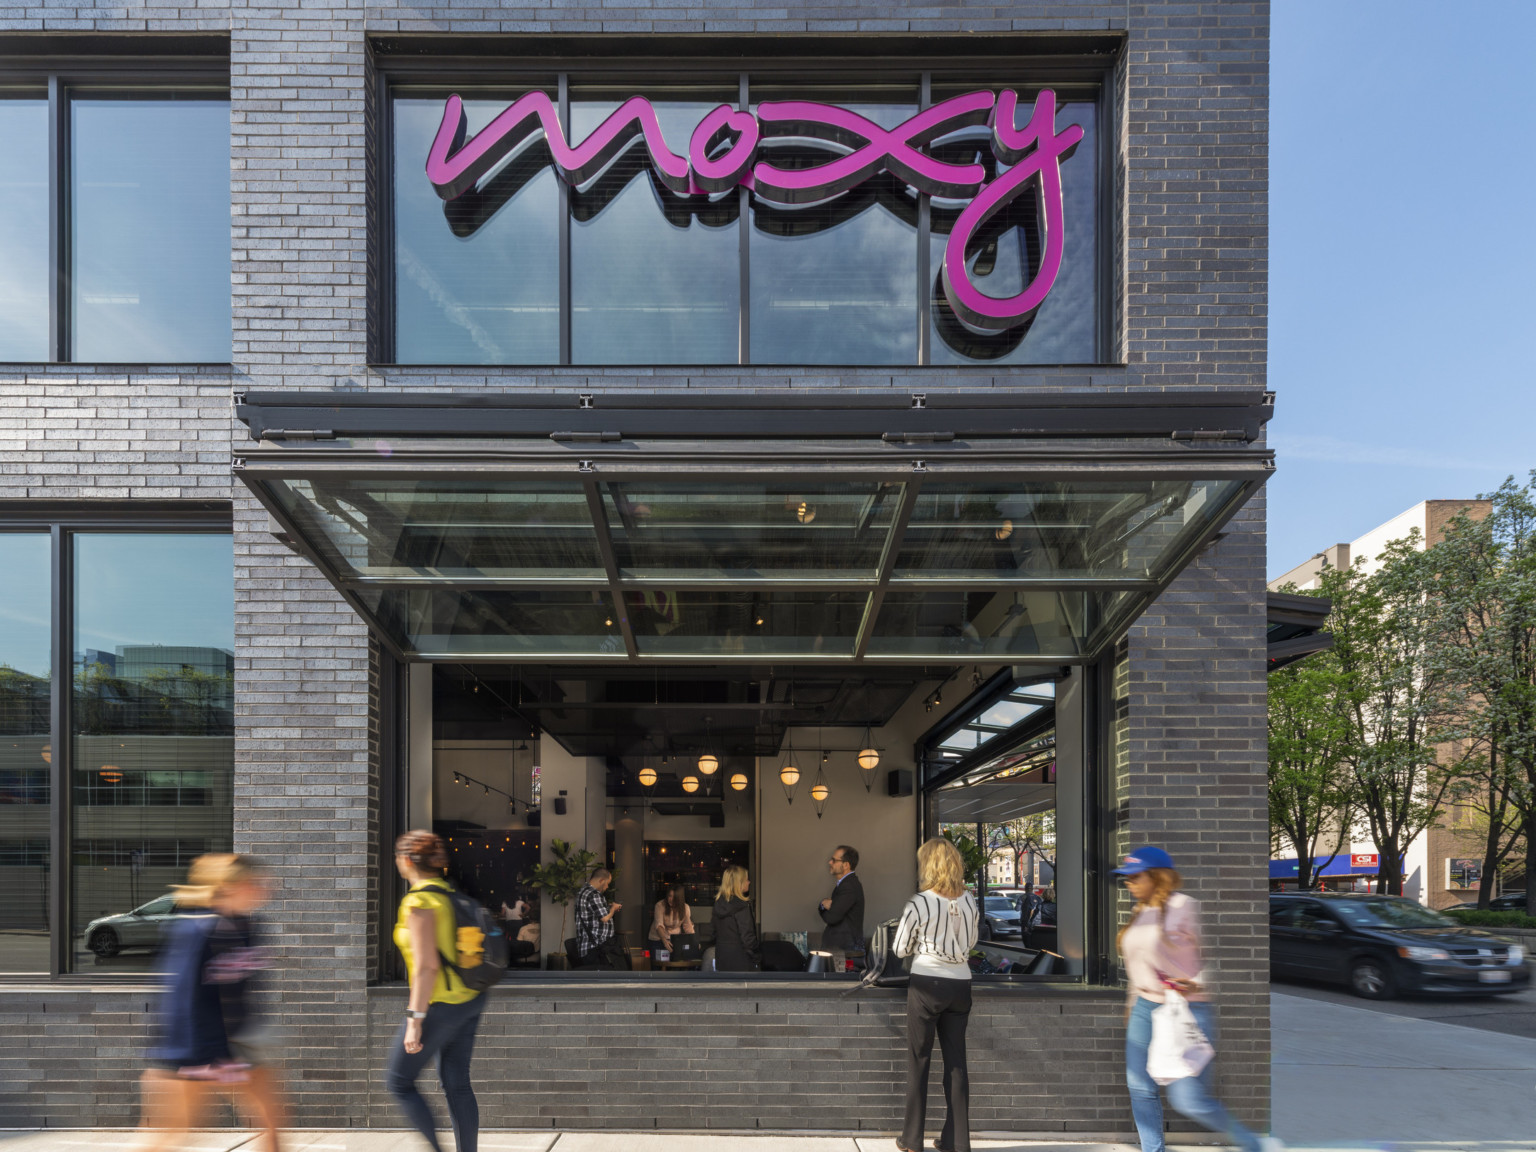 1st floor corner of building with window below pink Moxy sign opened up and out above sidewalk looking into dining area